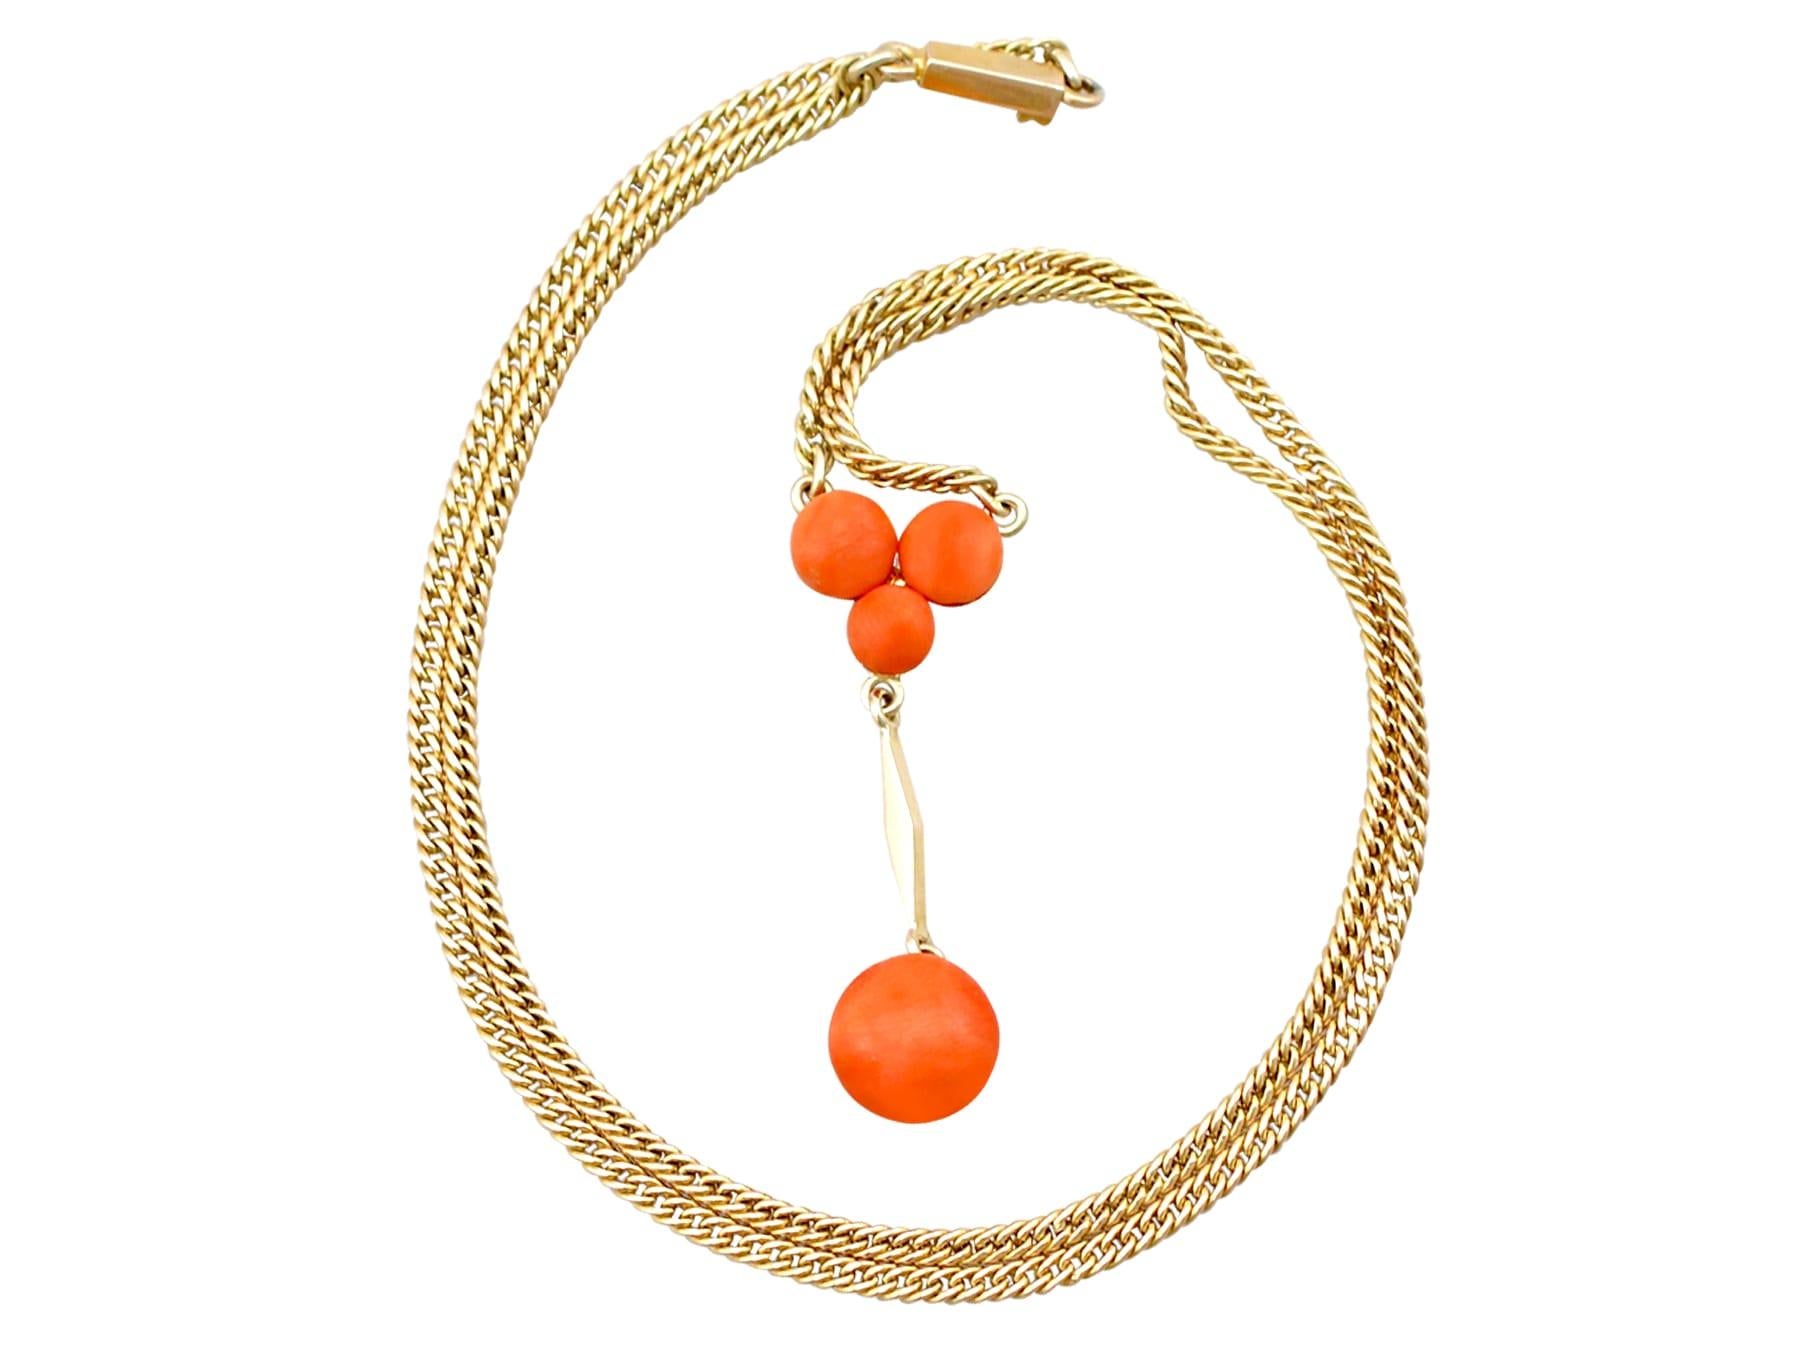 An impressive antique 1930s 2.72 carat coral and 14 karat yellow gold necklace; part of our diverse antique jewelry and estate jewelry collections.

This fine and impressive antique coral necklace has been crafted in 14k yellow gold.

The pendant is